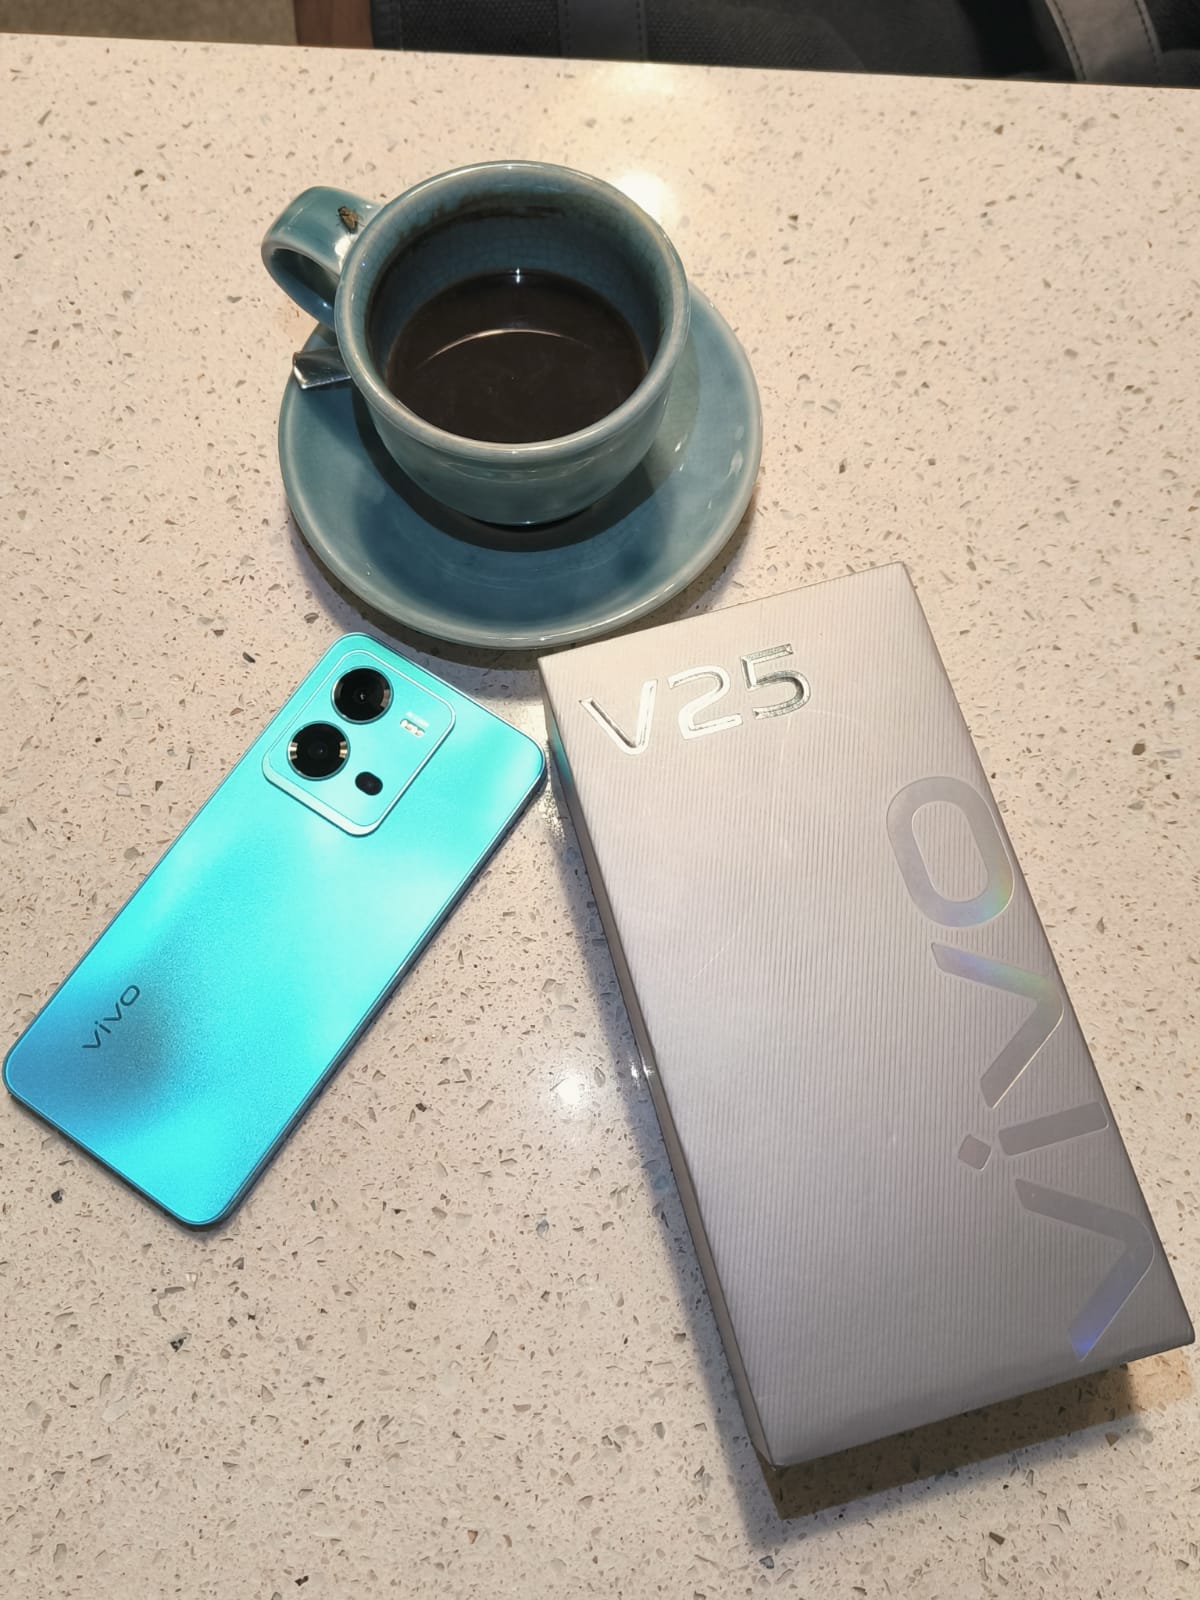 Vivo V25 5G: Stylish, Sassy, Stunning, an affordable mid-ranger with a stunning design to garner impeccable camera performance